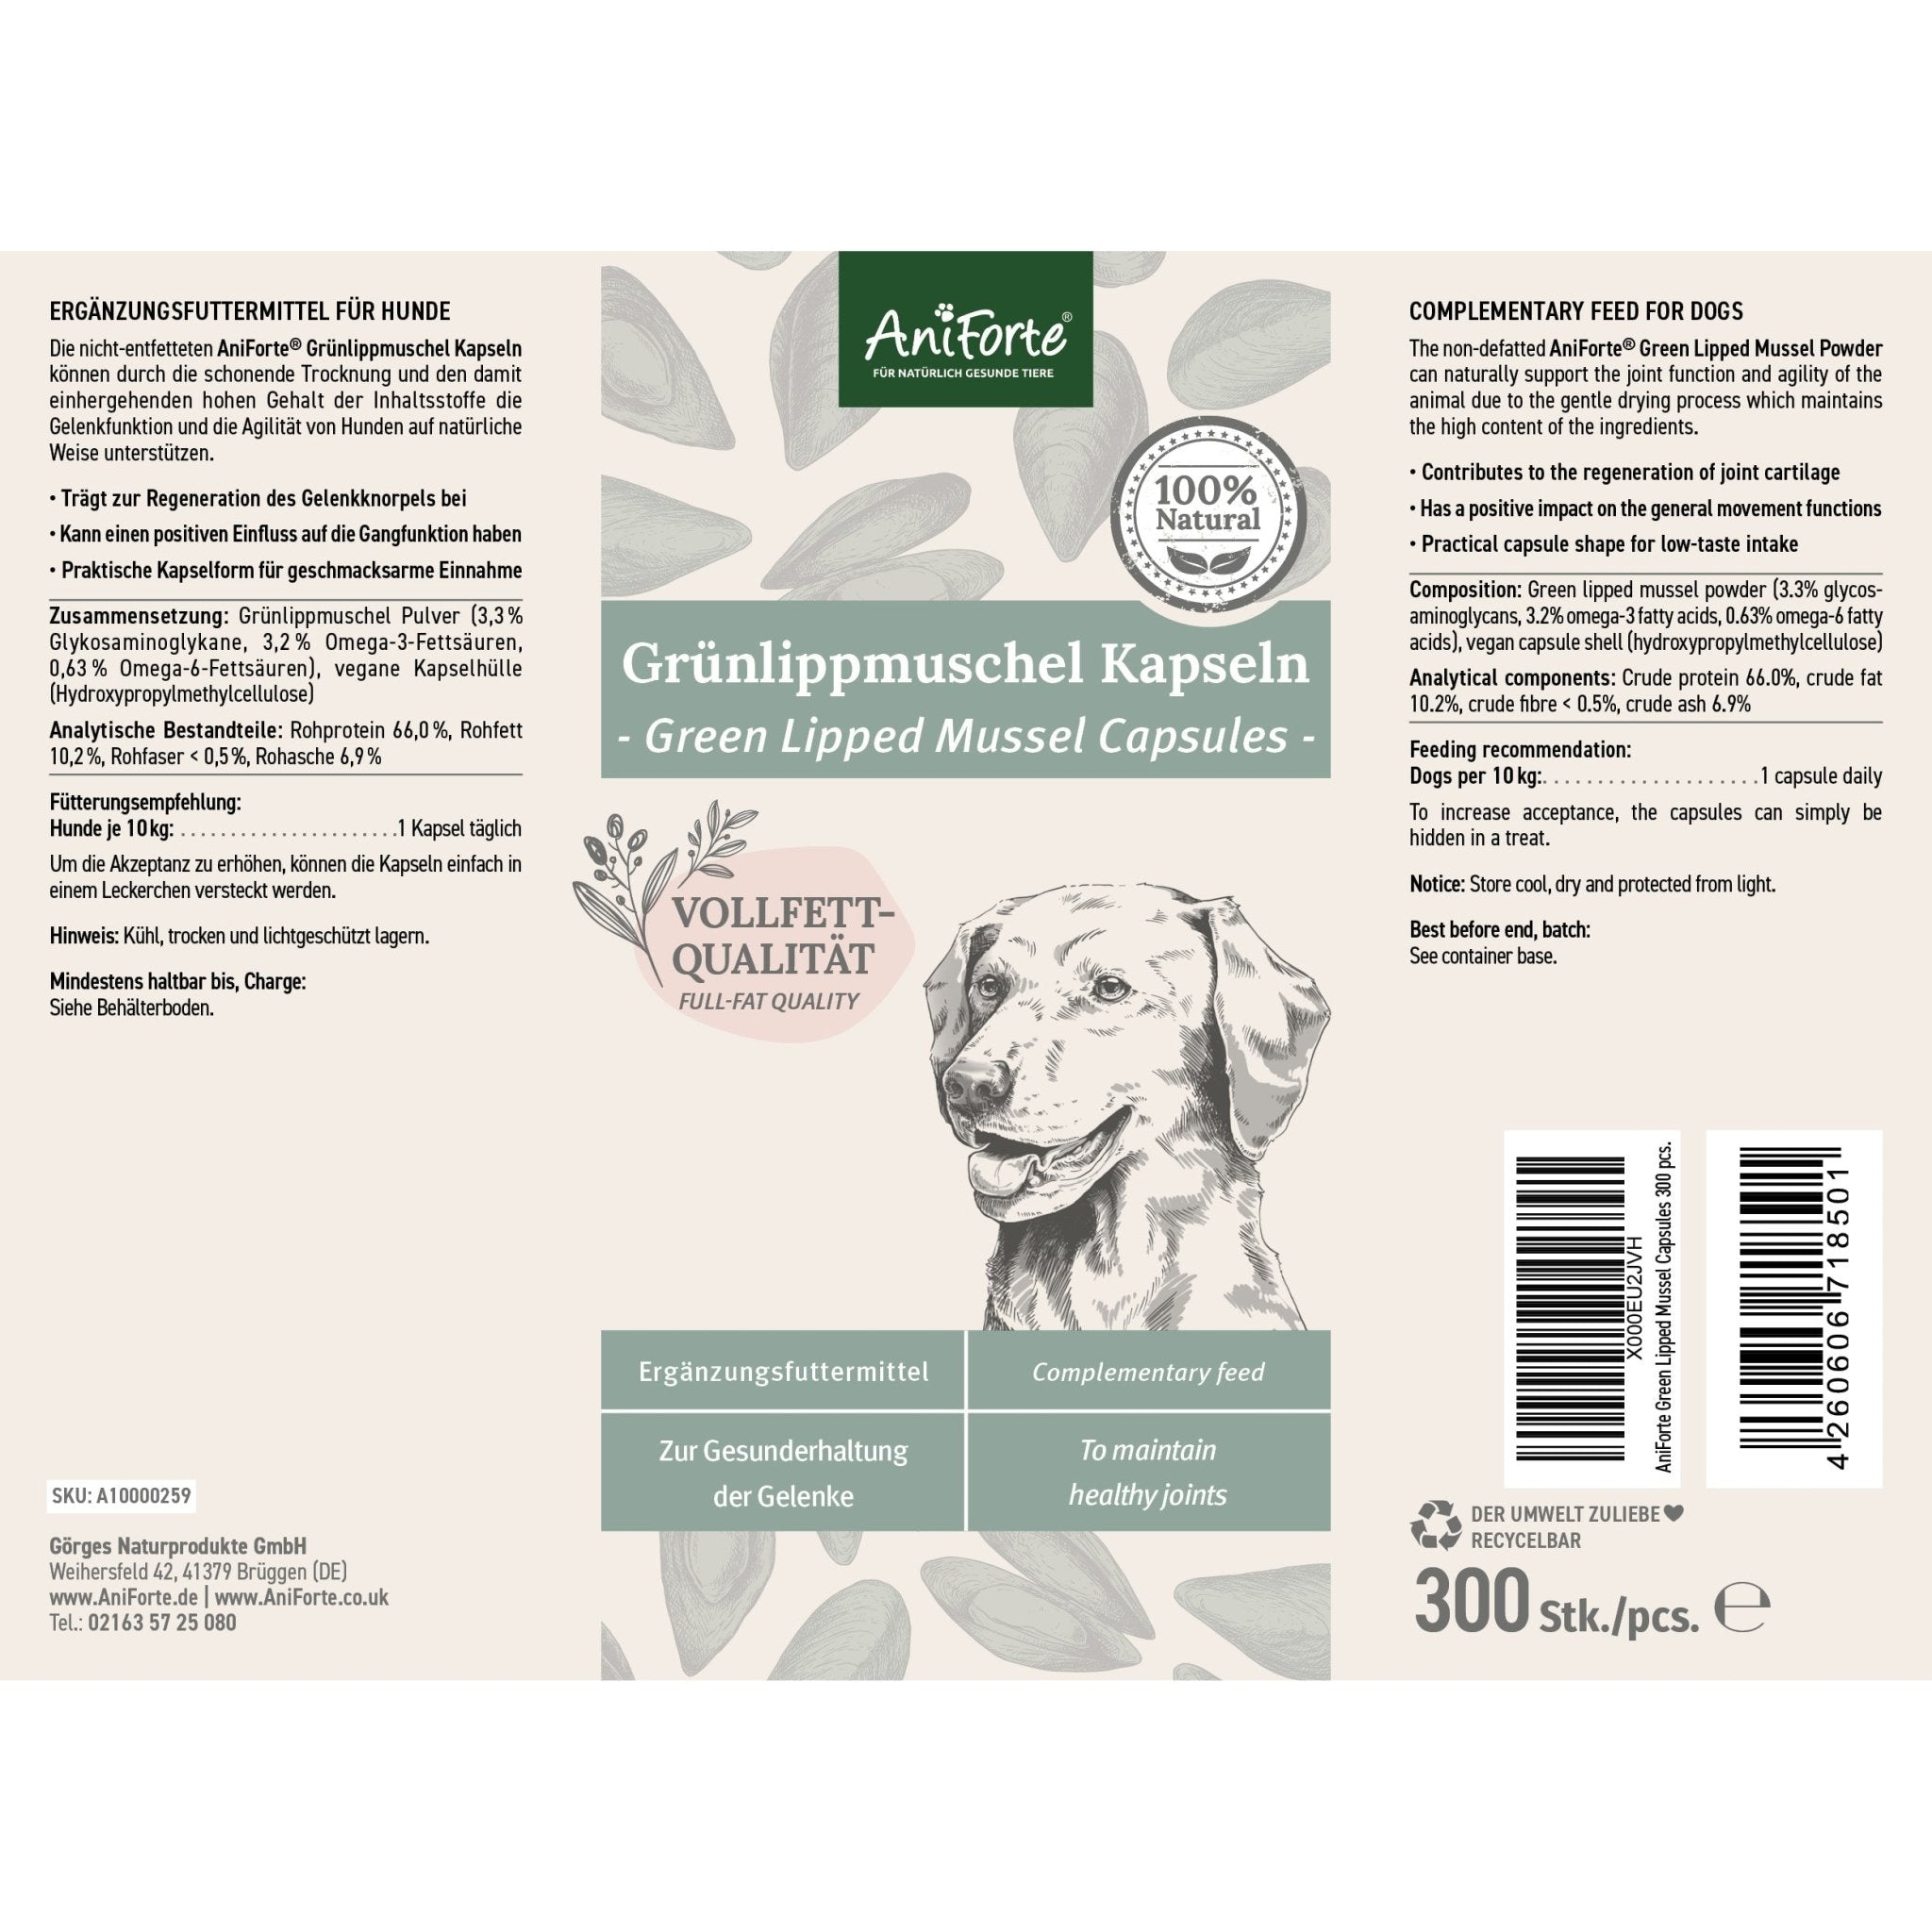 Green Lipped Mussel Capsules for Dogs - Joint Support Supplement - AniForte UK